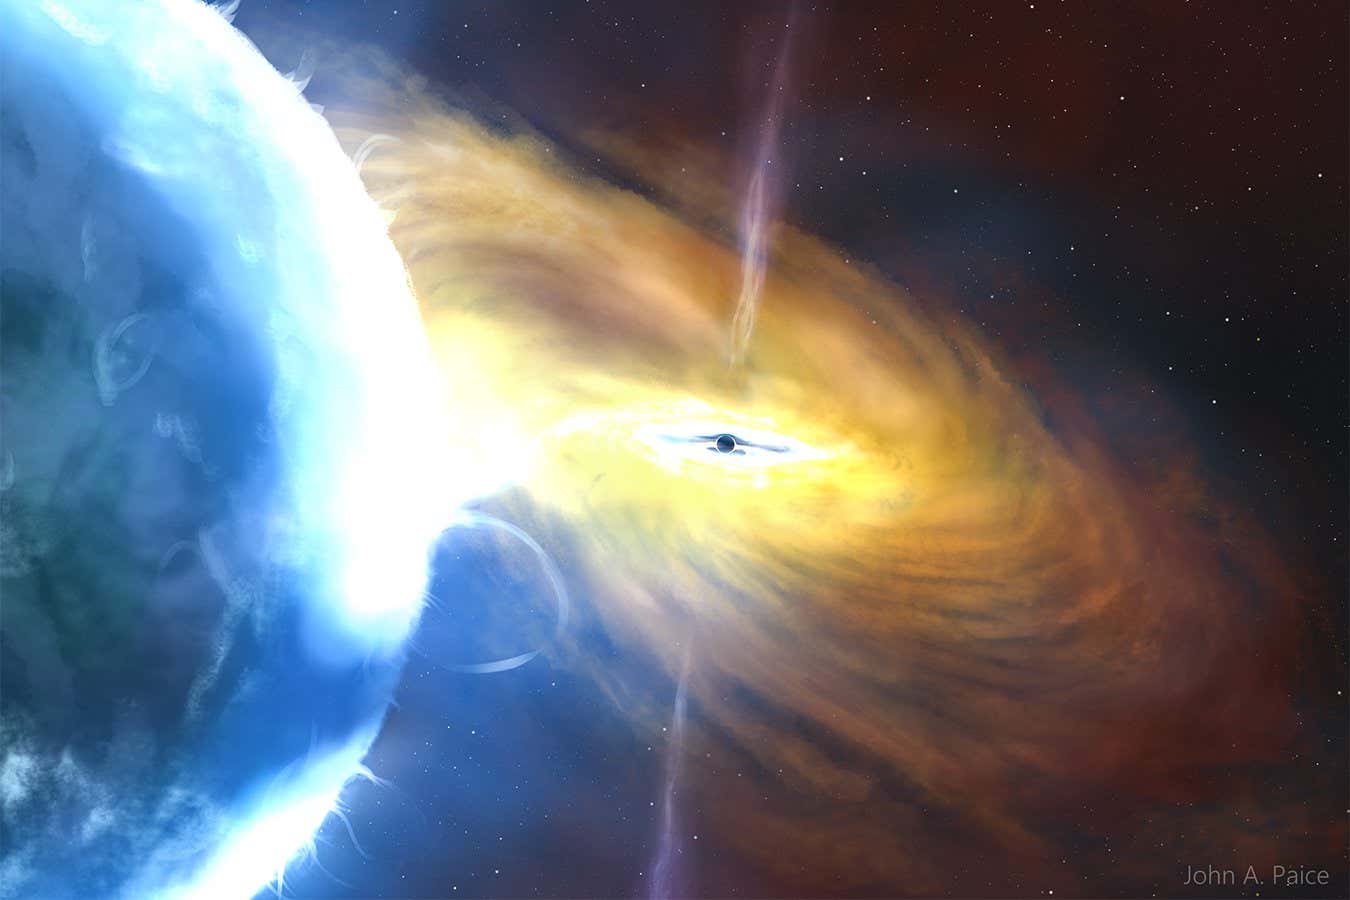 Astronomers detect the largest cosmic explosion ever seen

